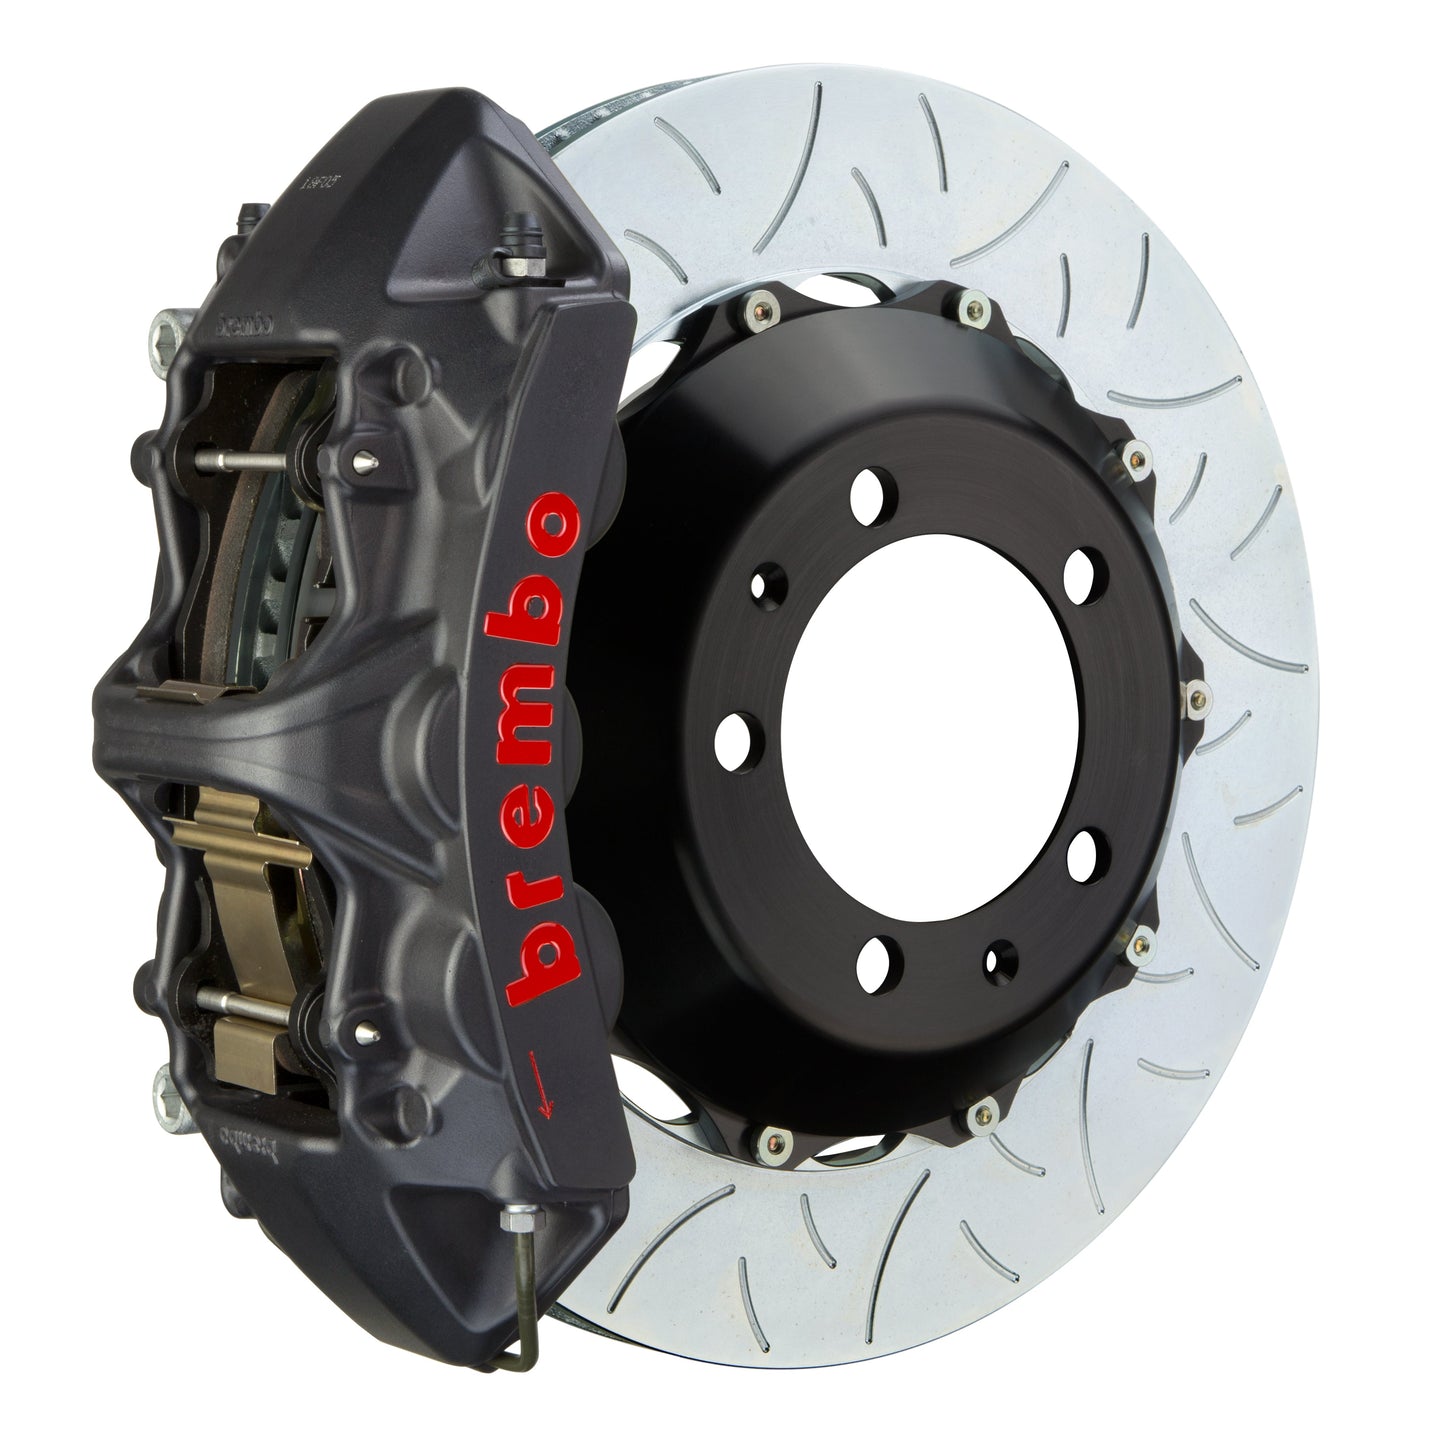 Front Brembo Gran Turismo Braking Upgrade Kit (1M19009AS) GT / S6 Caliper with 6-Pistons & 2-piece 380x32 Disc